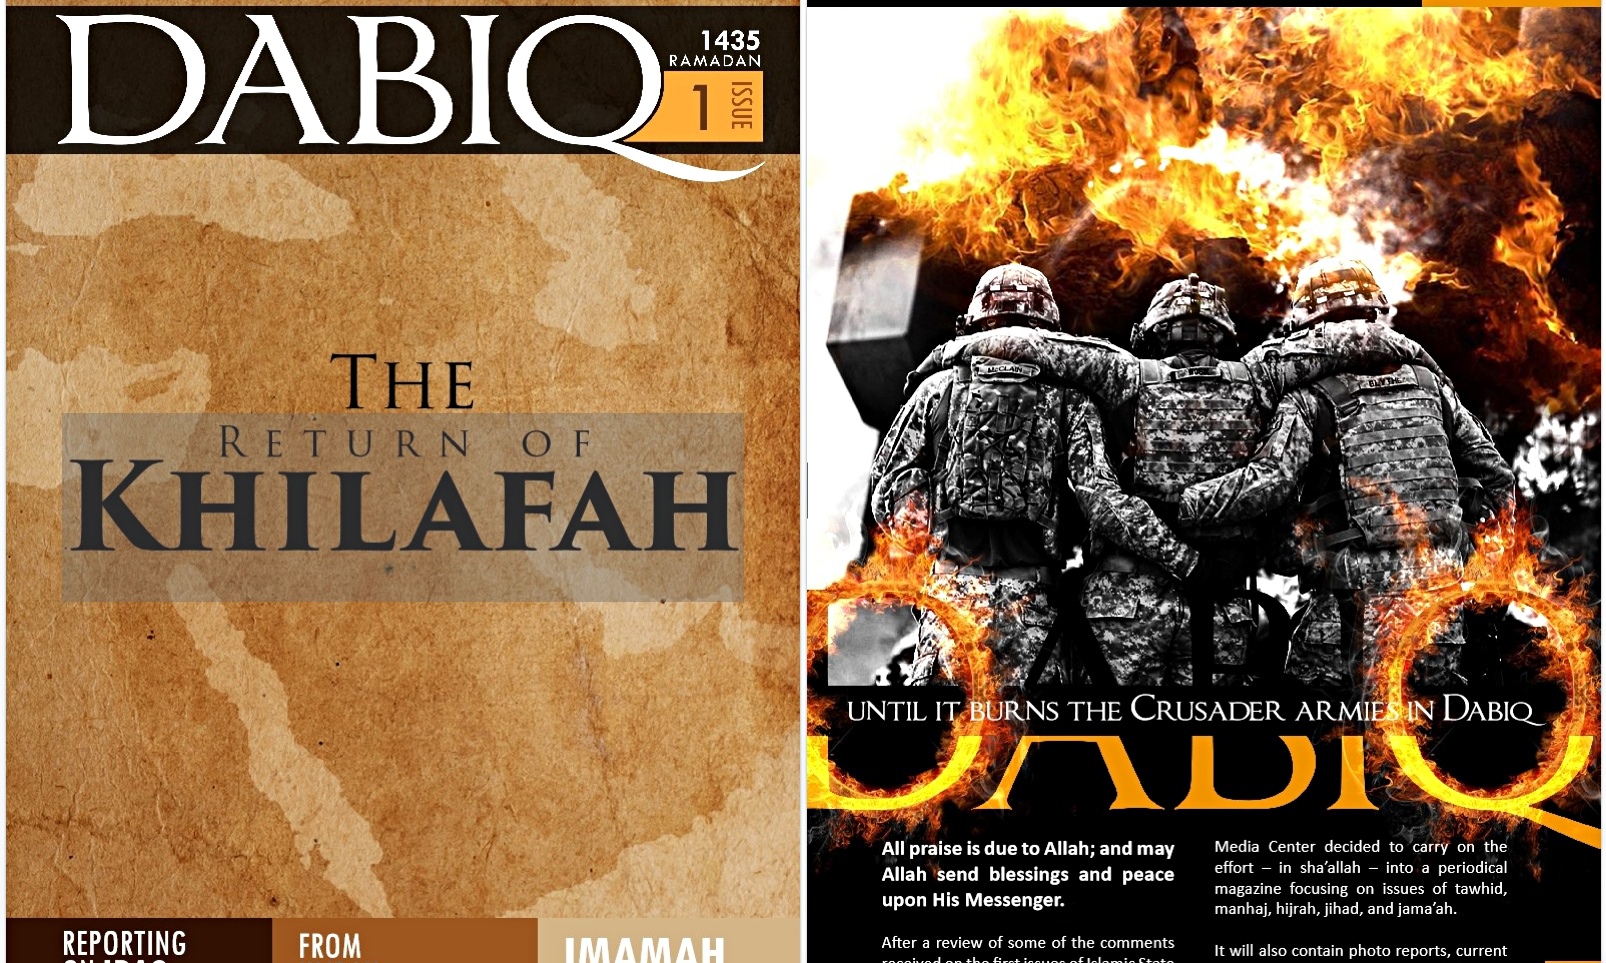 To Islamic State, Dabiq is important but it’s not the